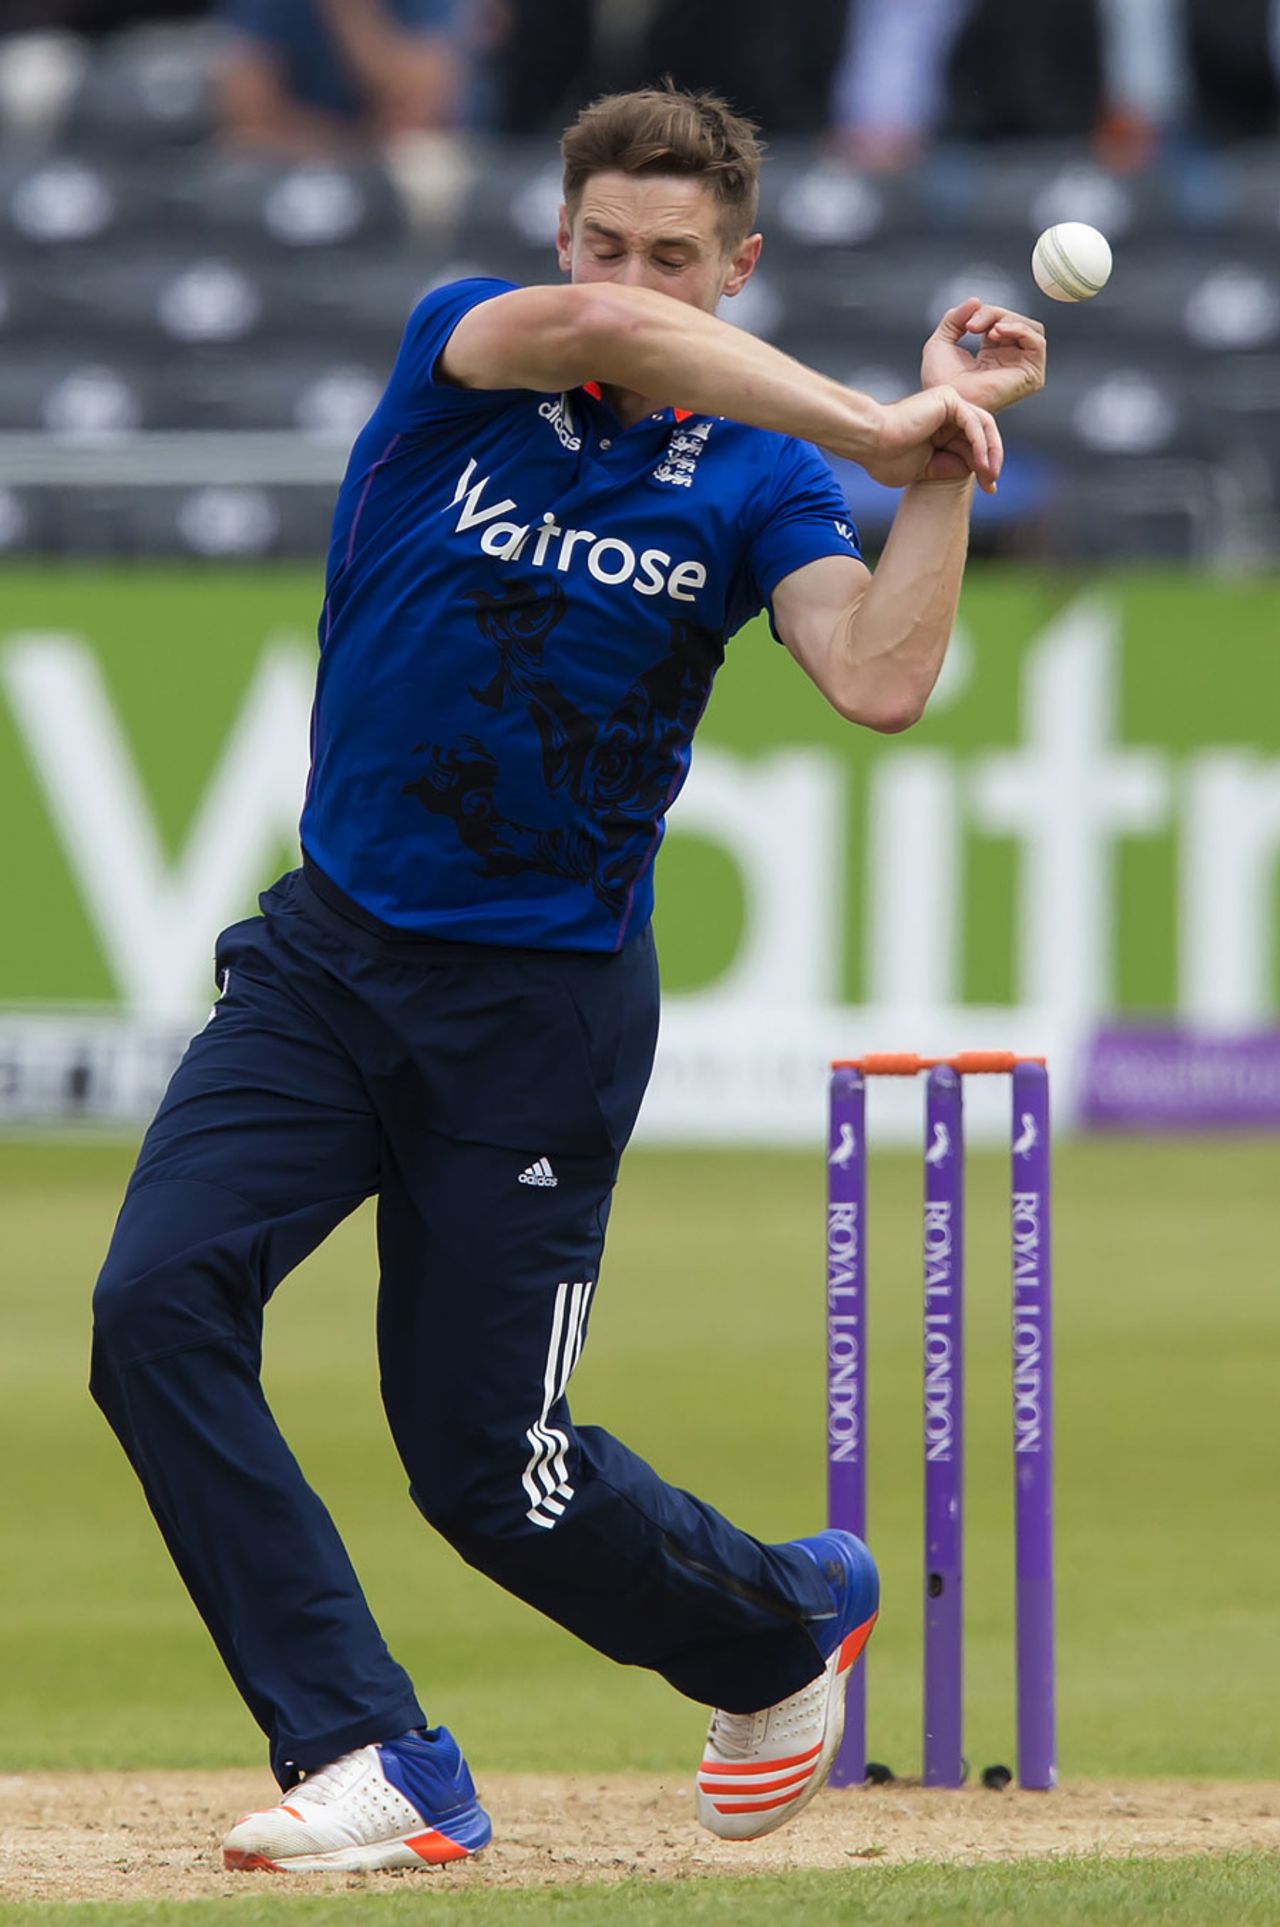 Chris Woakes could not hold on to a sharp chance, England v Sri Lanka, 3rd ODI, Bristol, June 26, 2016